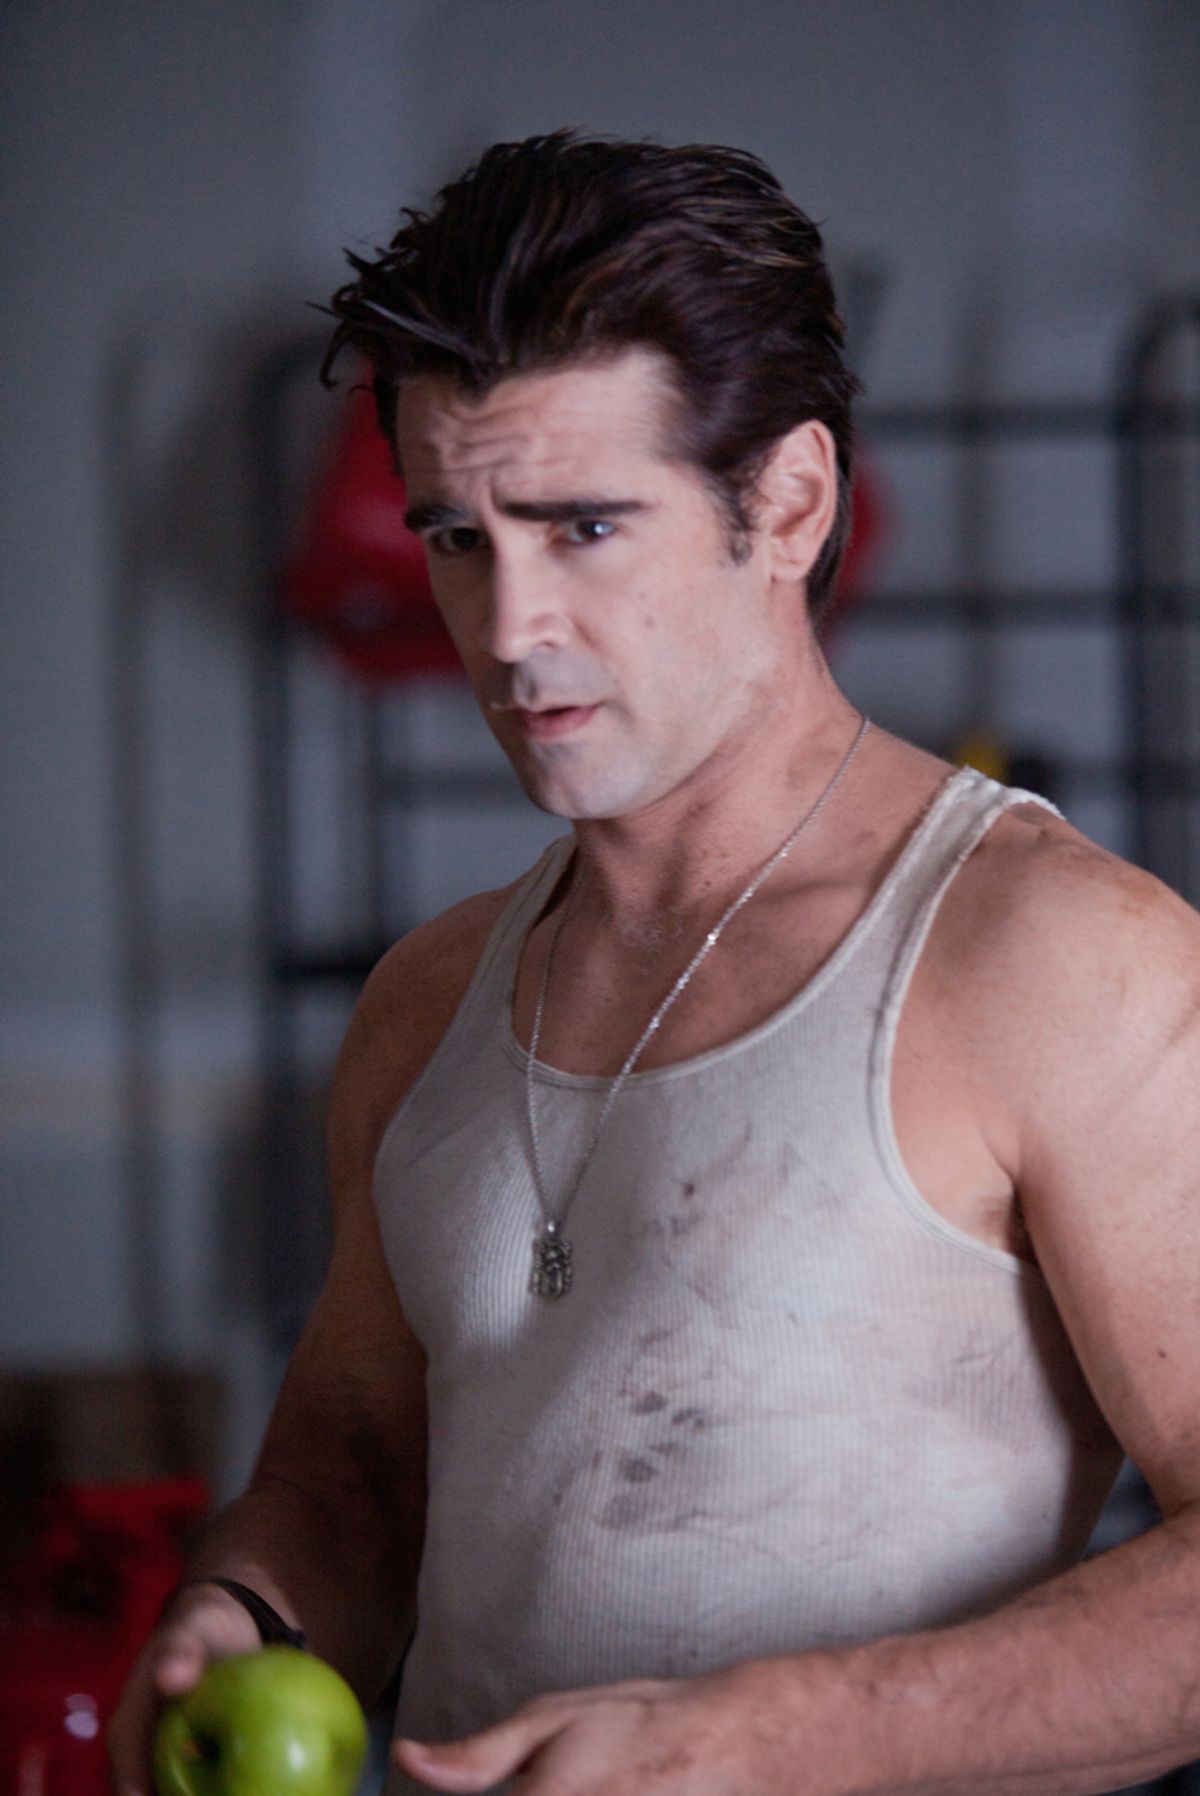 "FRIGHT NIGHT"

FN-113

Colin Farrell stars as Jerry, the intriguing new neighbor, in DreamWorks Picturesâ horror film âFright Night.â Directed by Craig Gillespie, âFright Nightâ is produced by Michael De Luca and Alison Rosenzweig.

Ph: Lorey Sebastian
  
Â©DreamWorks II Distribution Co., LLC. Â All Rights Reserved. (Lorey Sebastian)